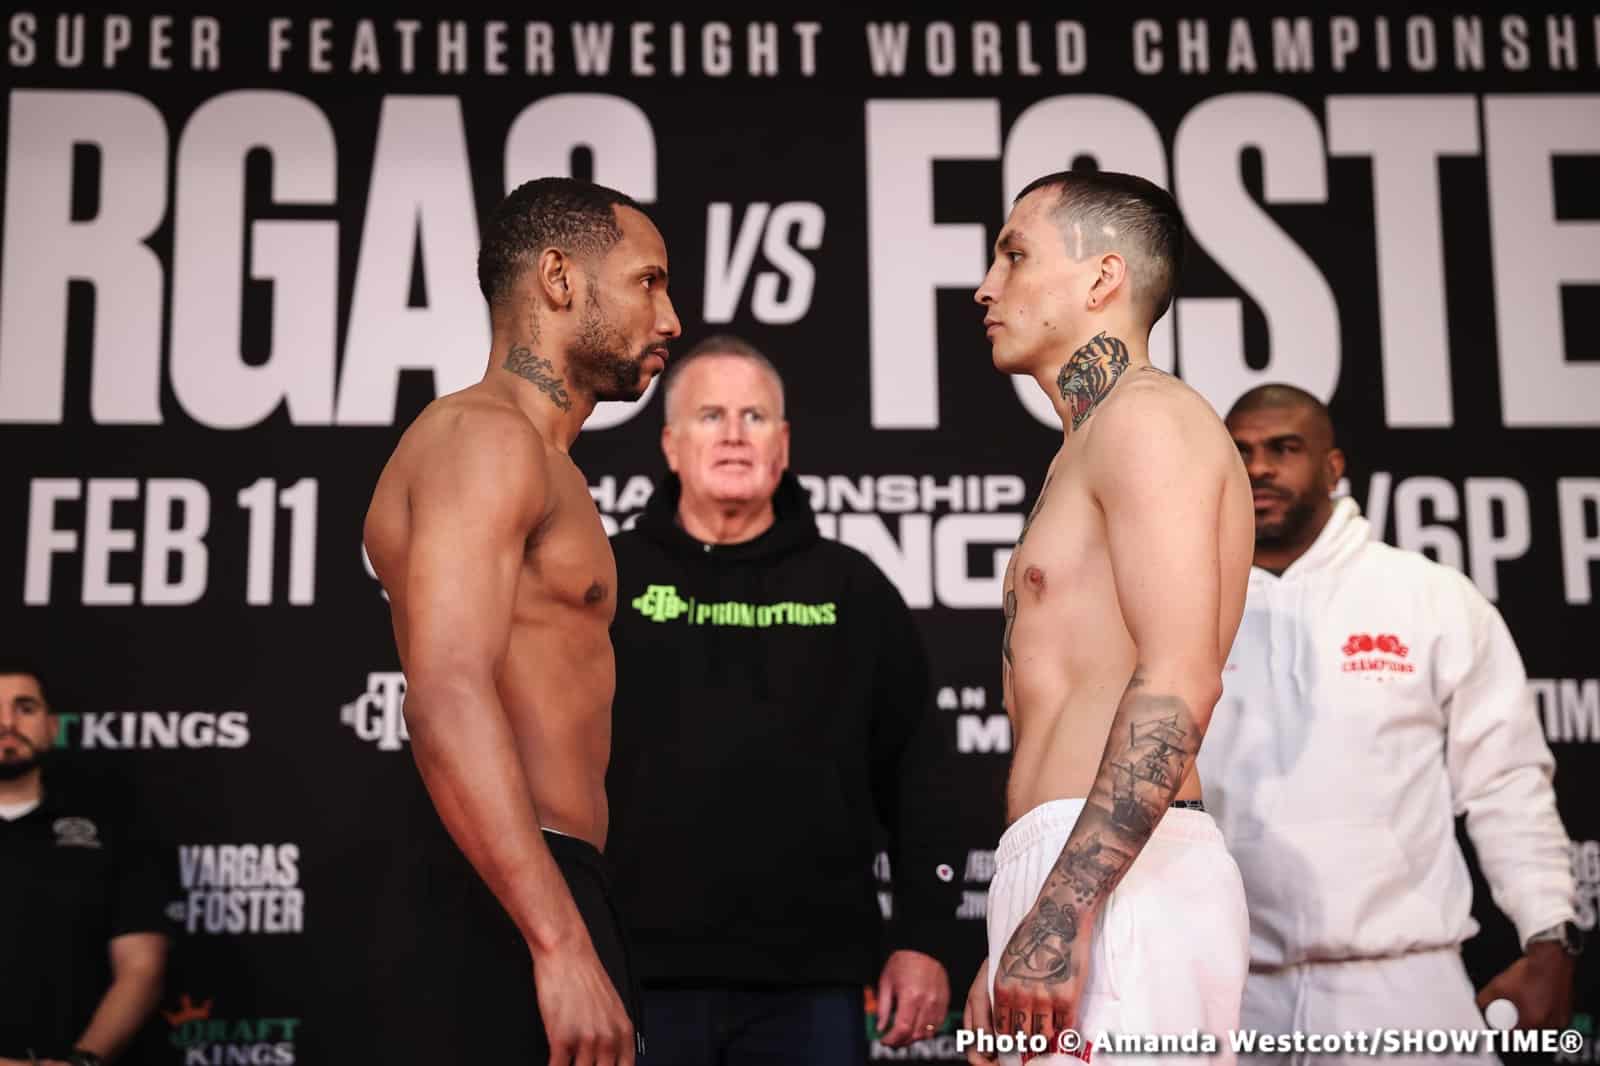 Vargas vs Foster Showtime Fight Results